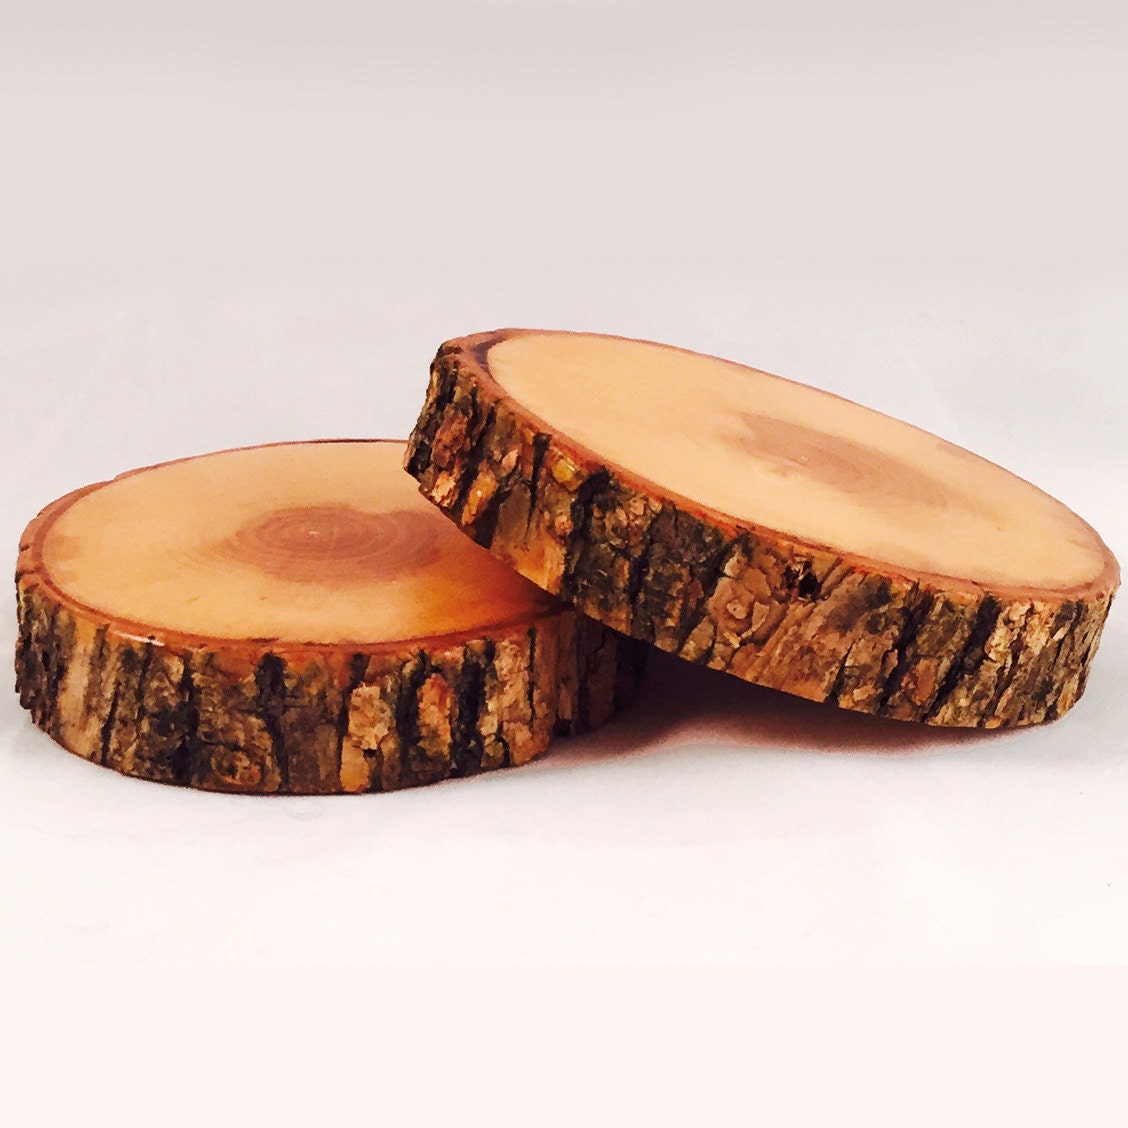 Unfinished Natural with Tree Bark Wood Slices 10 Pcs 4.2-4.7 inch Disc  Coasters Wood Coaster Pieces Craft Wood kit Circles Crafts Christmas  Ornaments